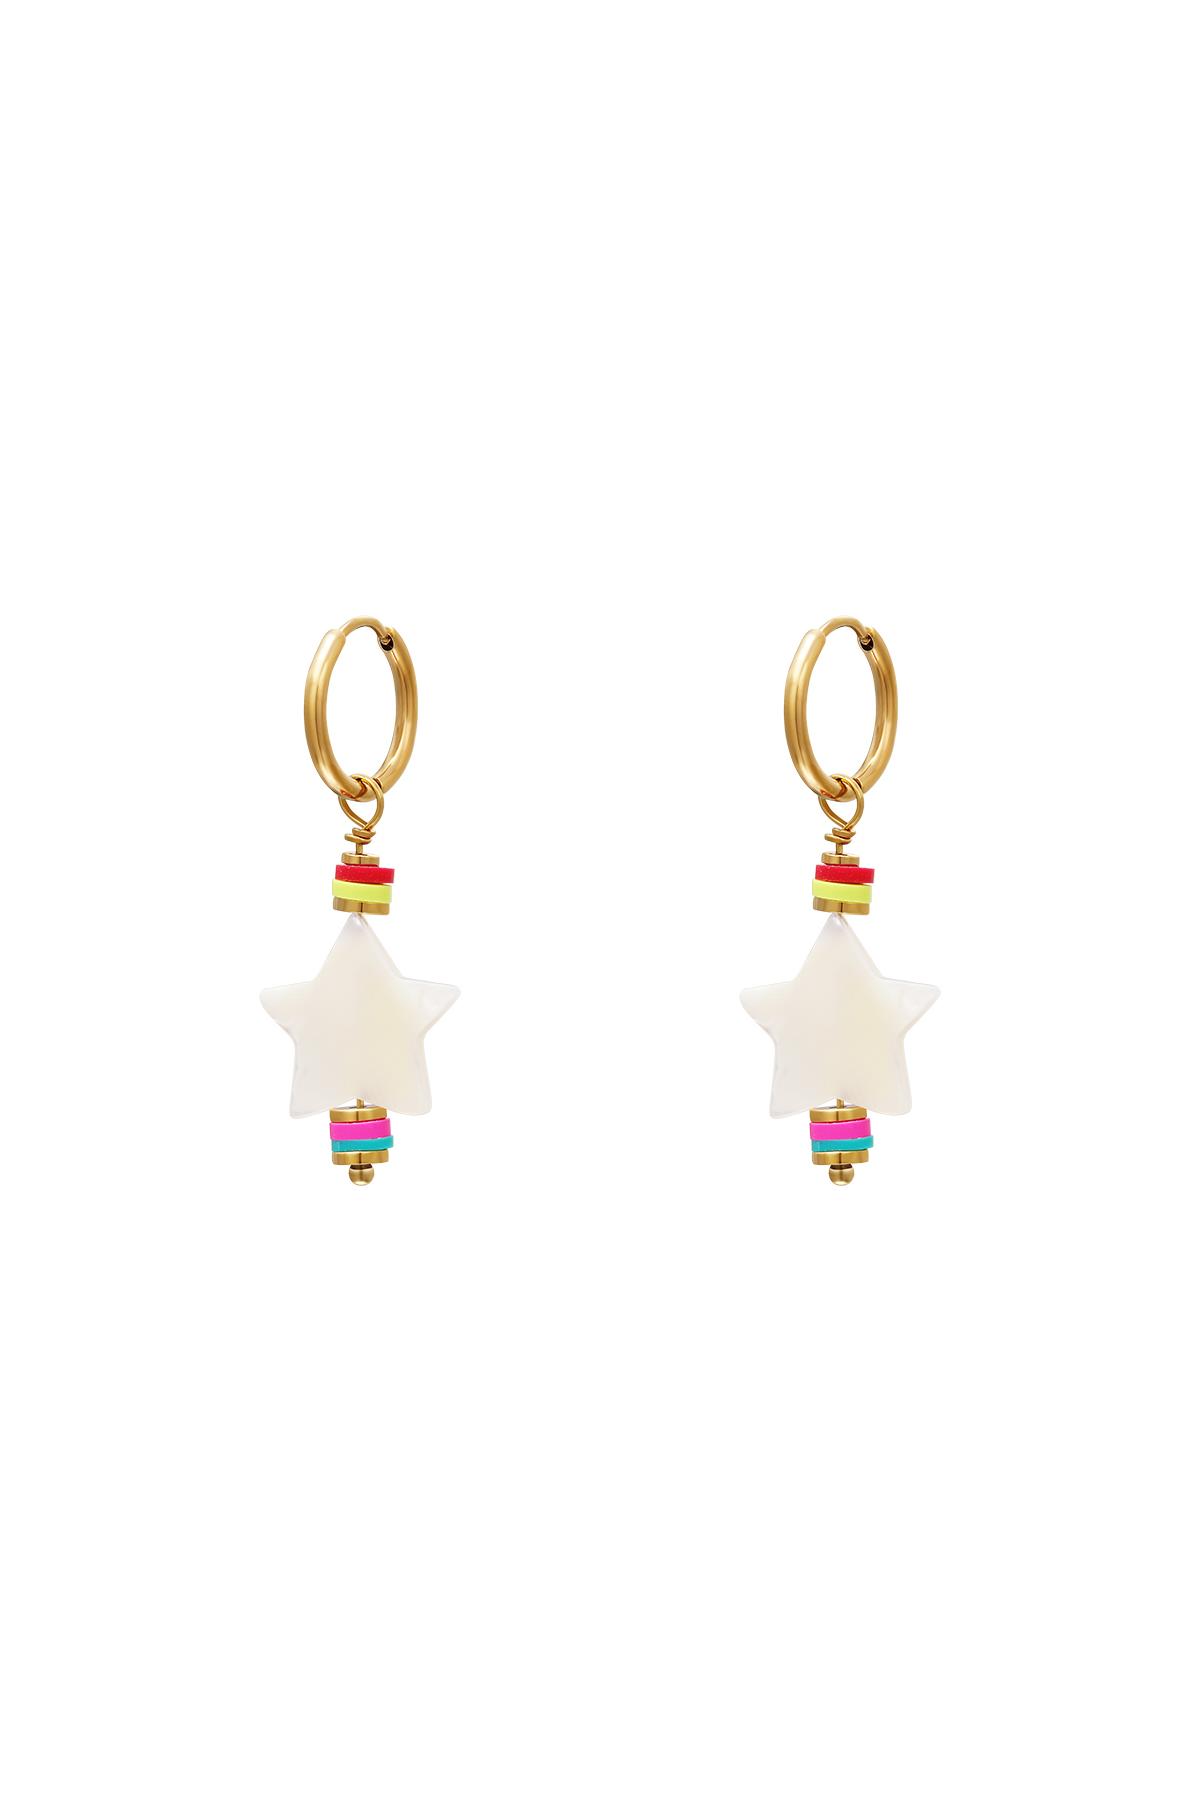 Beads & Stars earrings - #summergirls collection Gold Sea Shells 